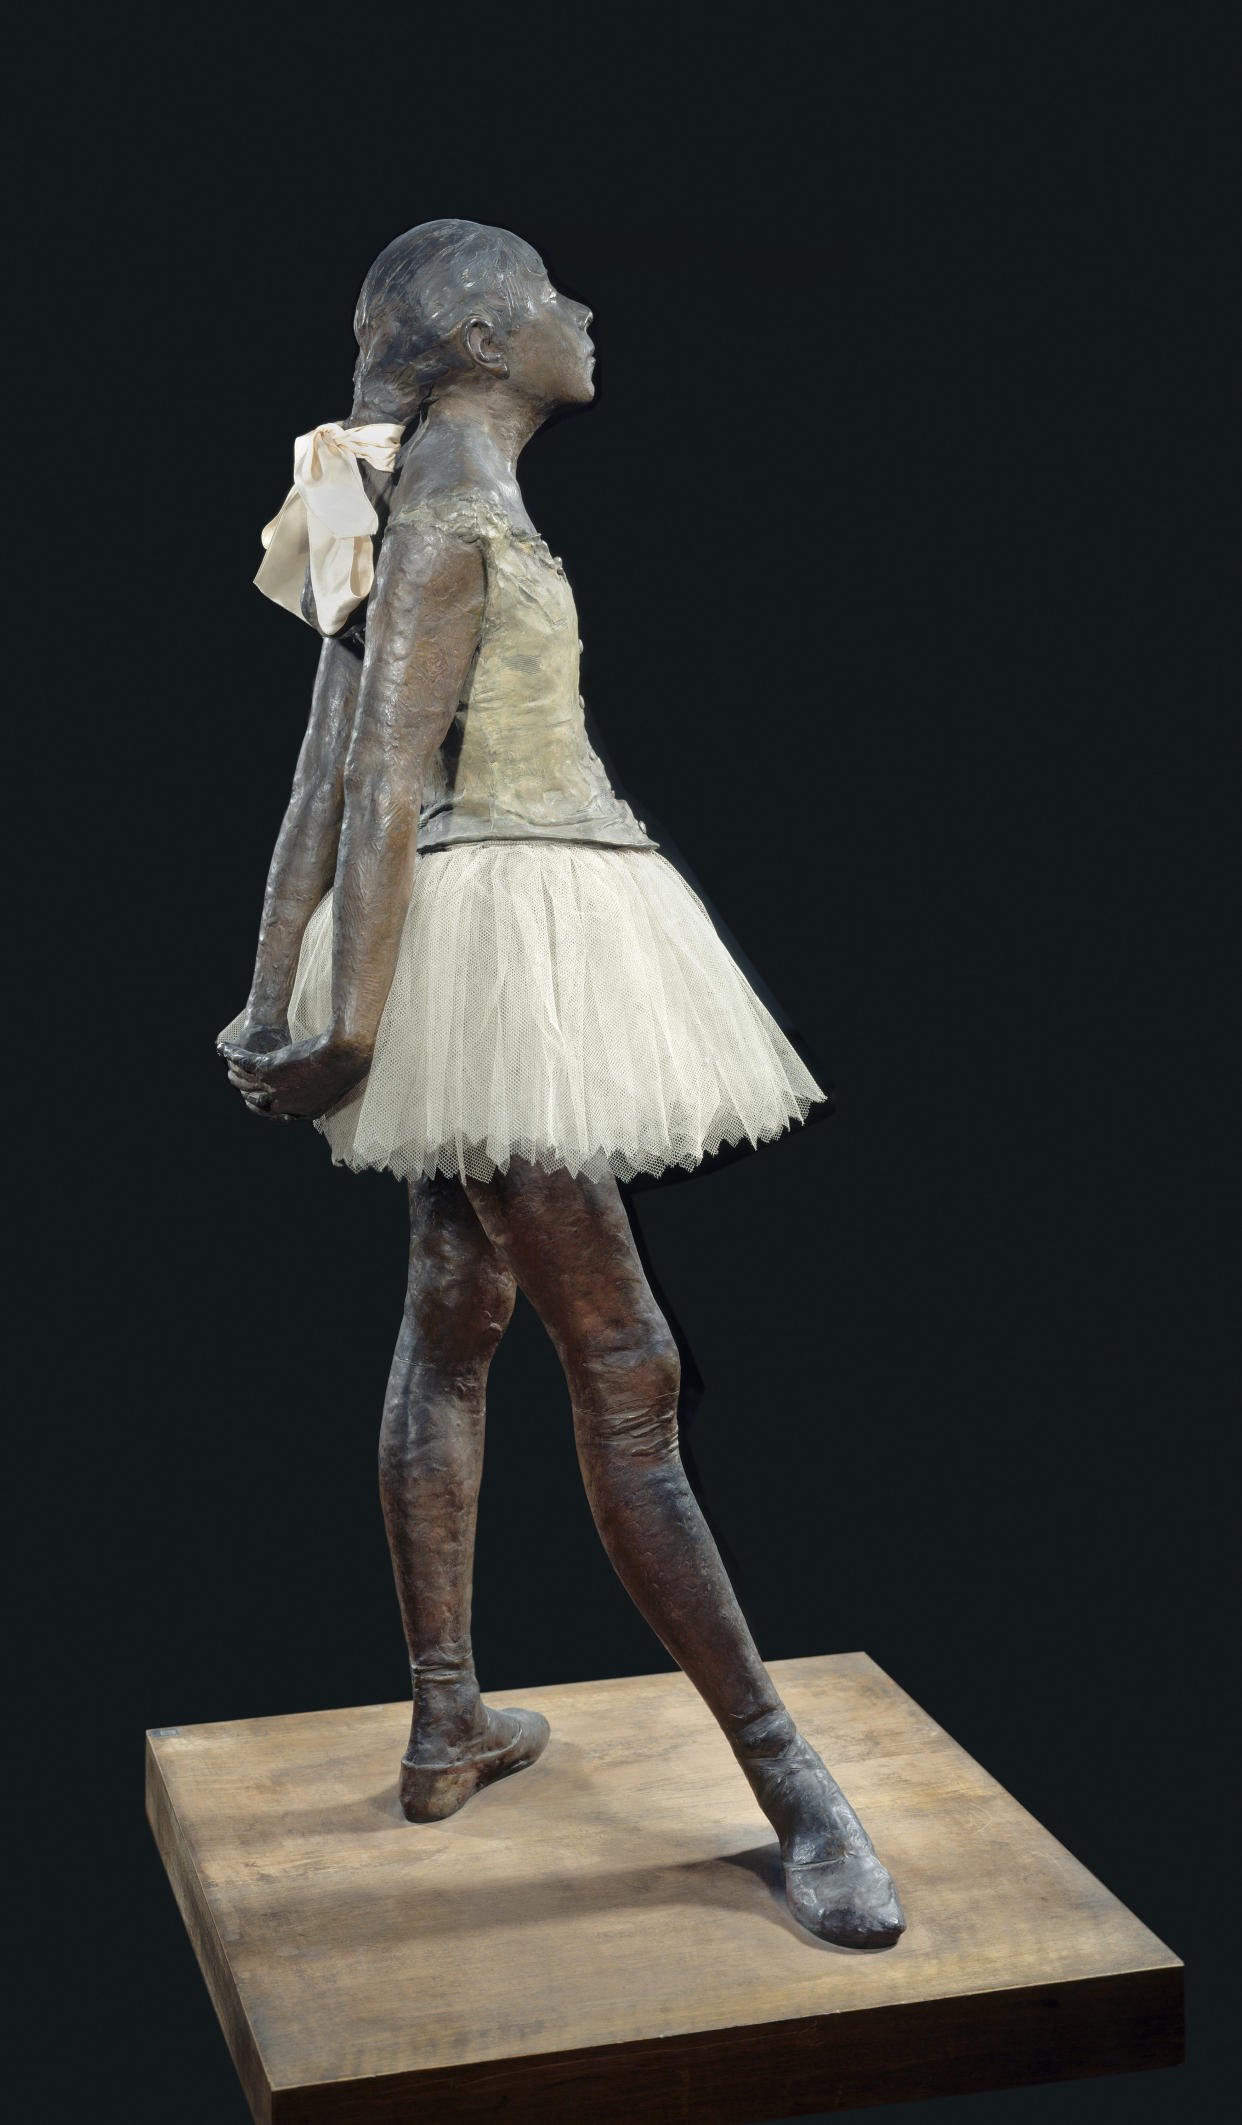 The subject of Edgar Degas' "Little Dancer, Aged 14," Marie van Goethem, is nowhere near as iconic as the statue. (Photo: Christophel Fine Art via Getty Images)